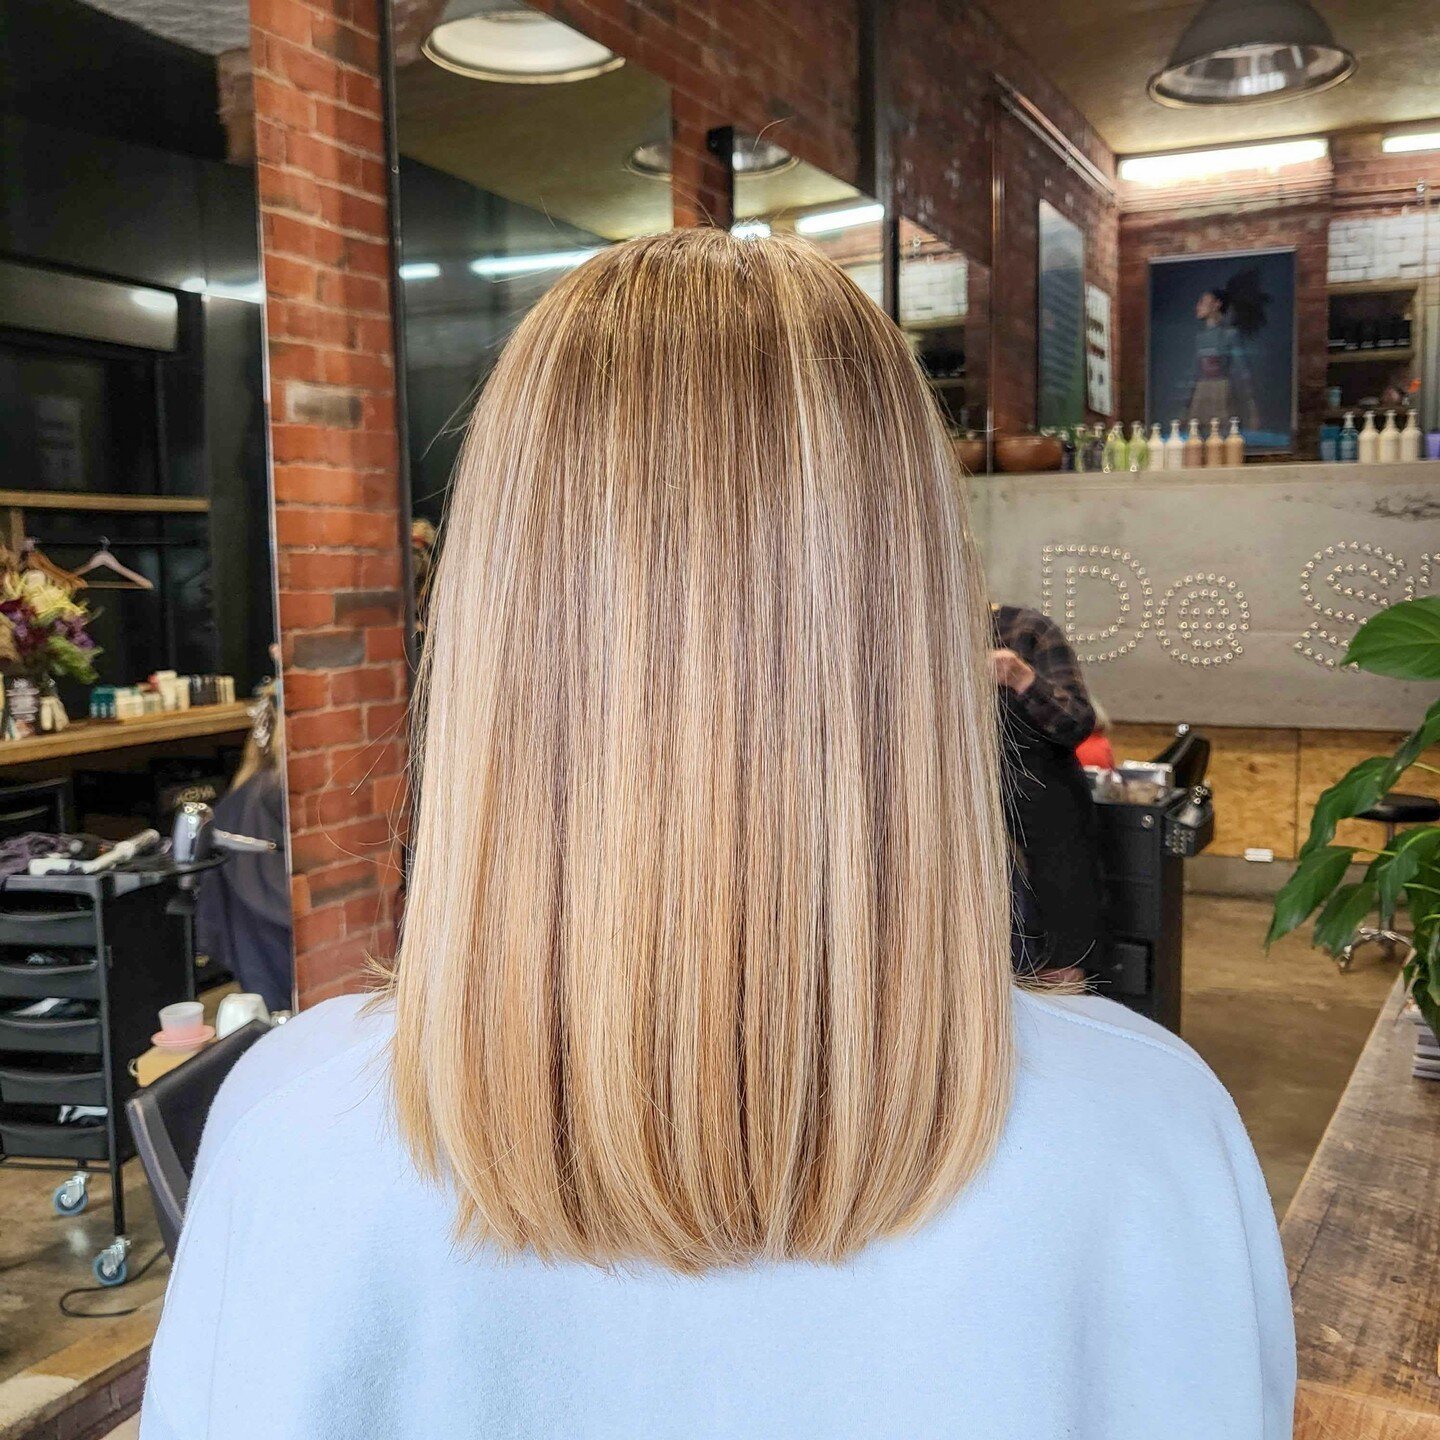 🍯🍯🍯⁠
Honey Blonde highlights for Amber, that are super satisfying to look at. Amber's hair is also such a beautiful canvas to work with - it's so healthy and strong. Making it a delight to create magic with. Colour and cut by Tracy. ⁠
⁠
⁠
⁠
⁠
⁠
⁠
